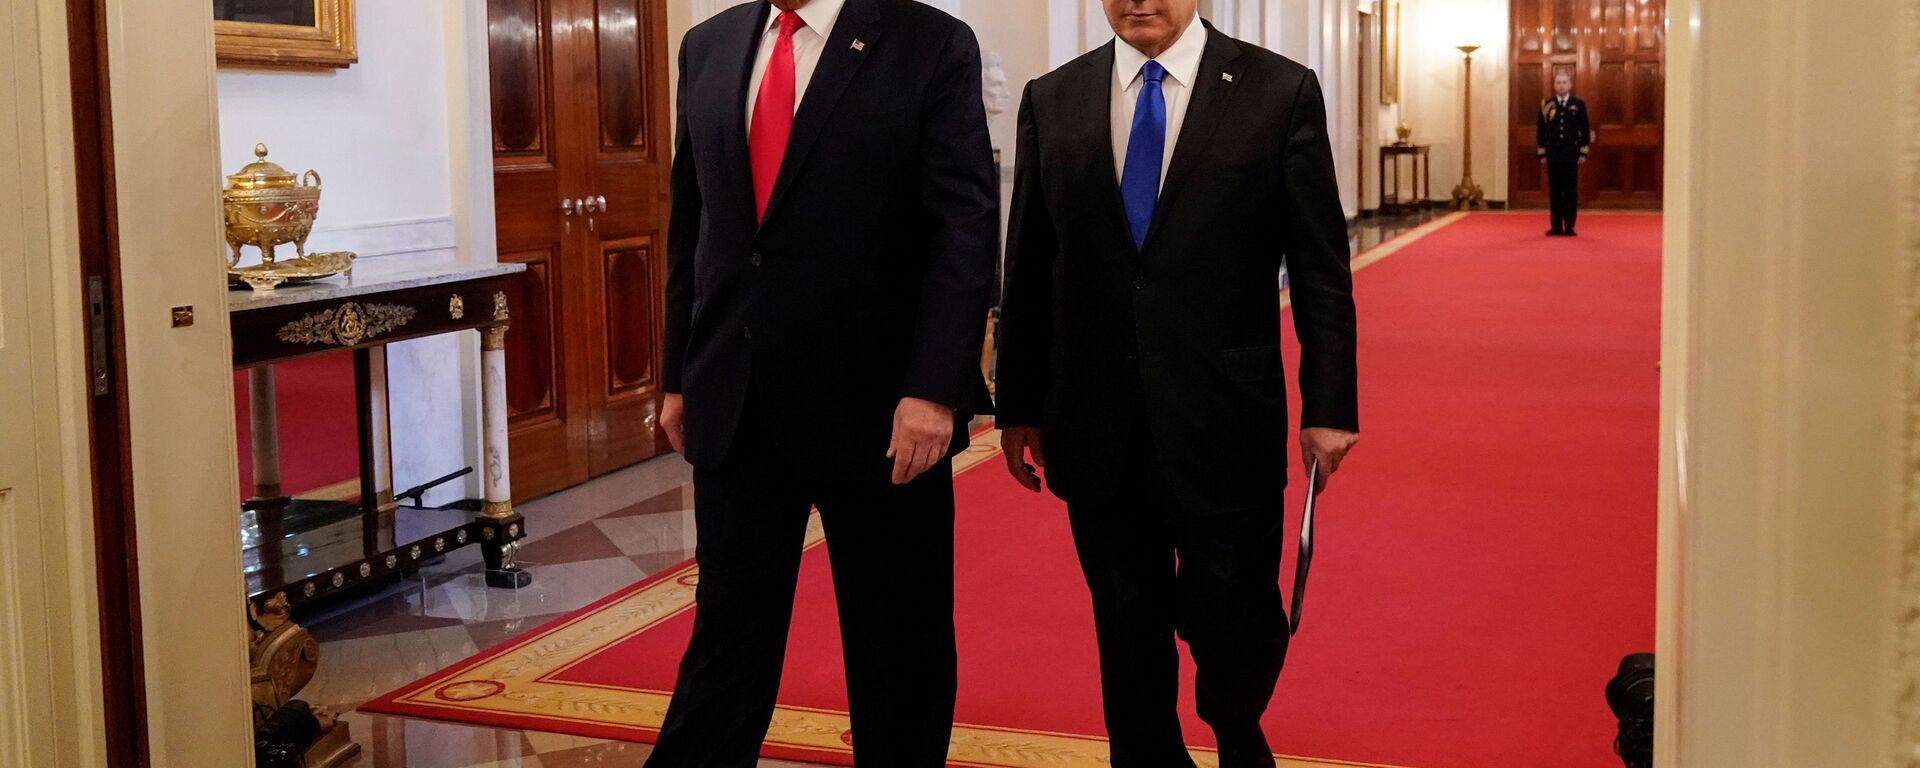 U.S. President Donald Trump and Israel's Prime Minister Benjamin Netanyahu arrive to deliver joint remarks on a Middle East peace plan proposal in the East Room of the White House in Washington, U.S., January 28, 2020. - Sputnik International, 1920, 09.02.2020